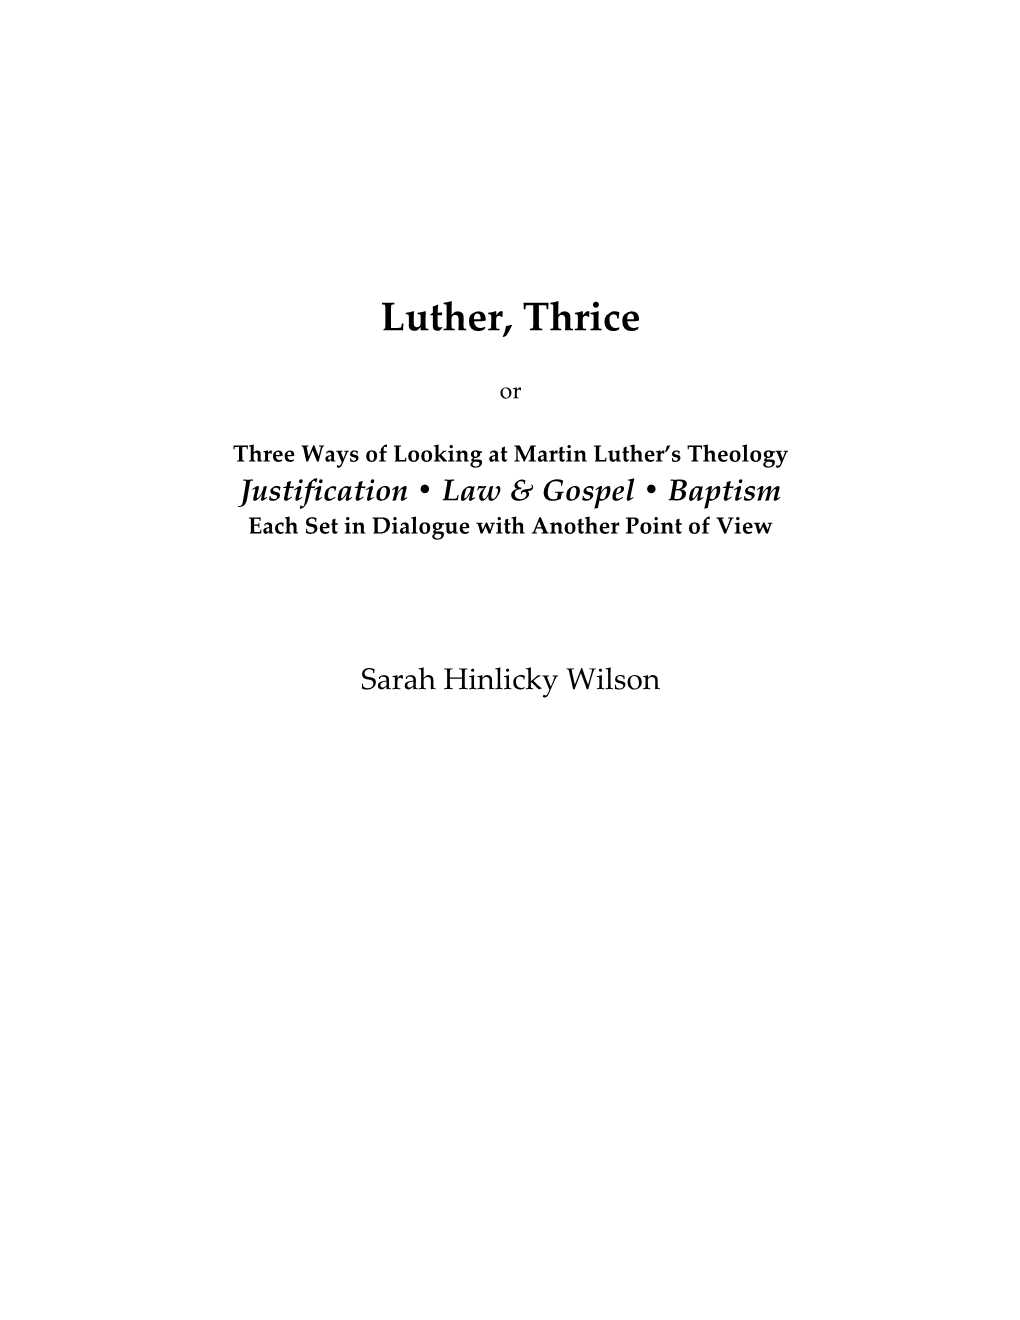 Luther, Thrice Version 1